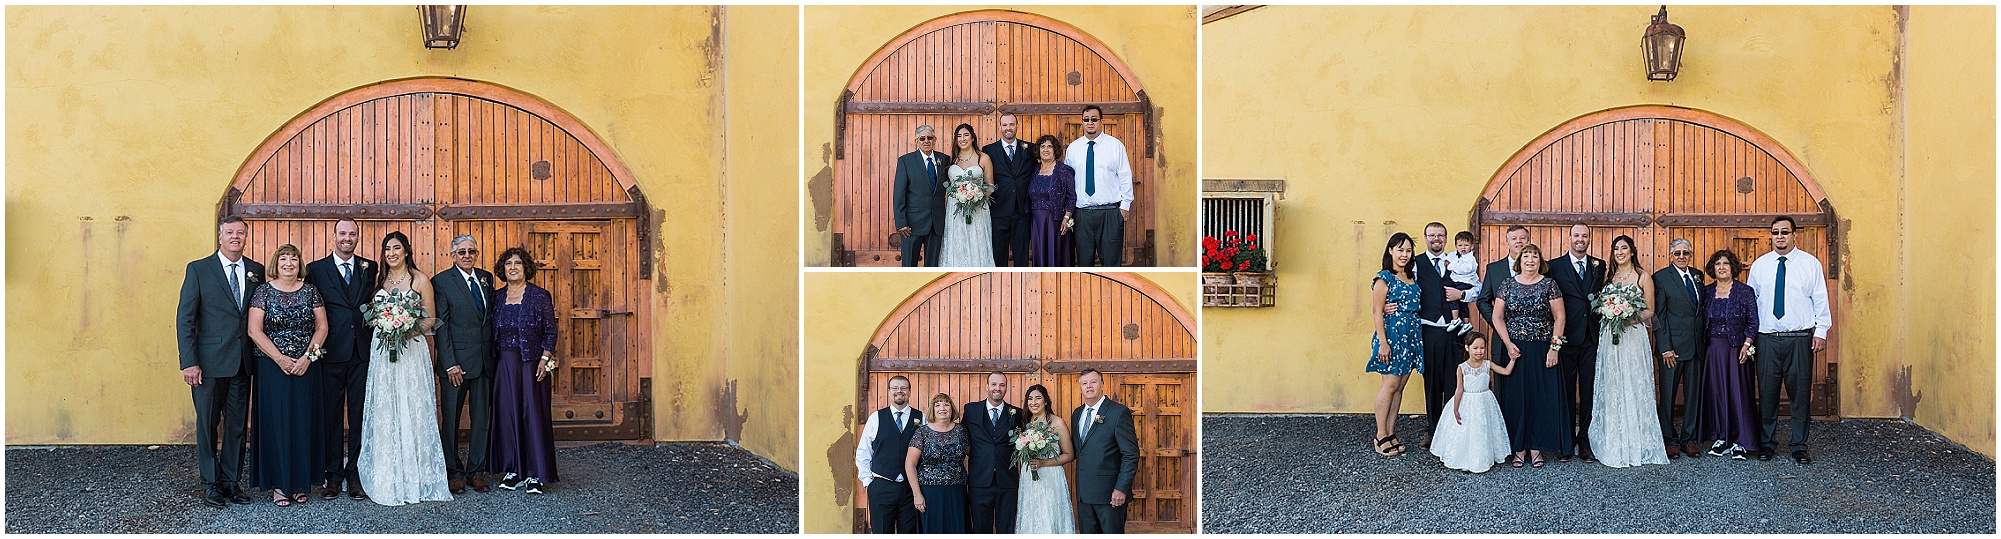 Family formal portraits at the Tuscan Stables wedding venue at Ranch at the Canyons. Photographed by Bend Oregon wedding photographer Erica Swantek Photography. 